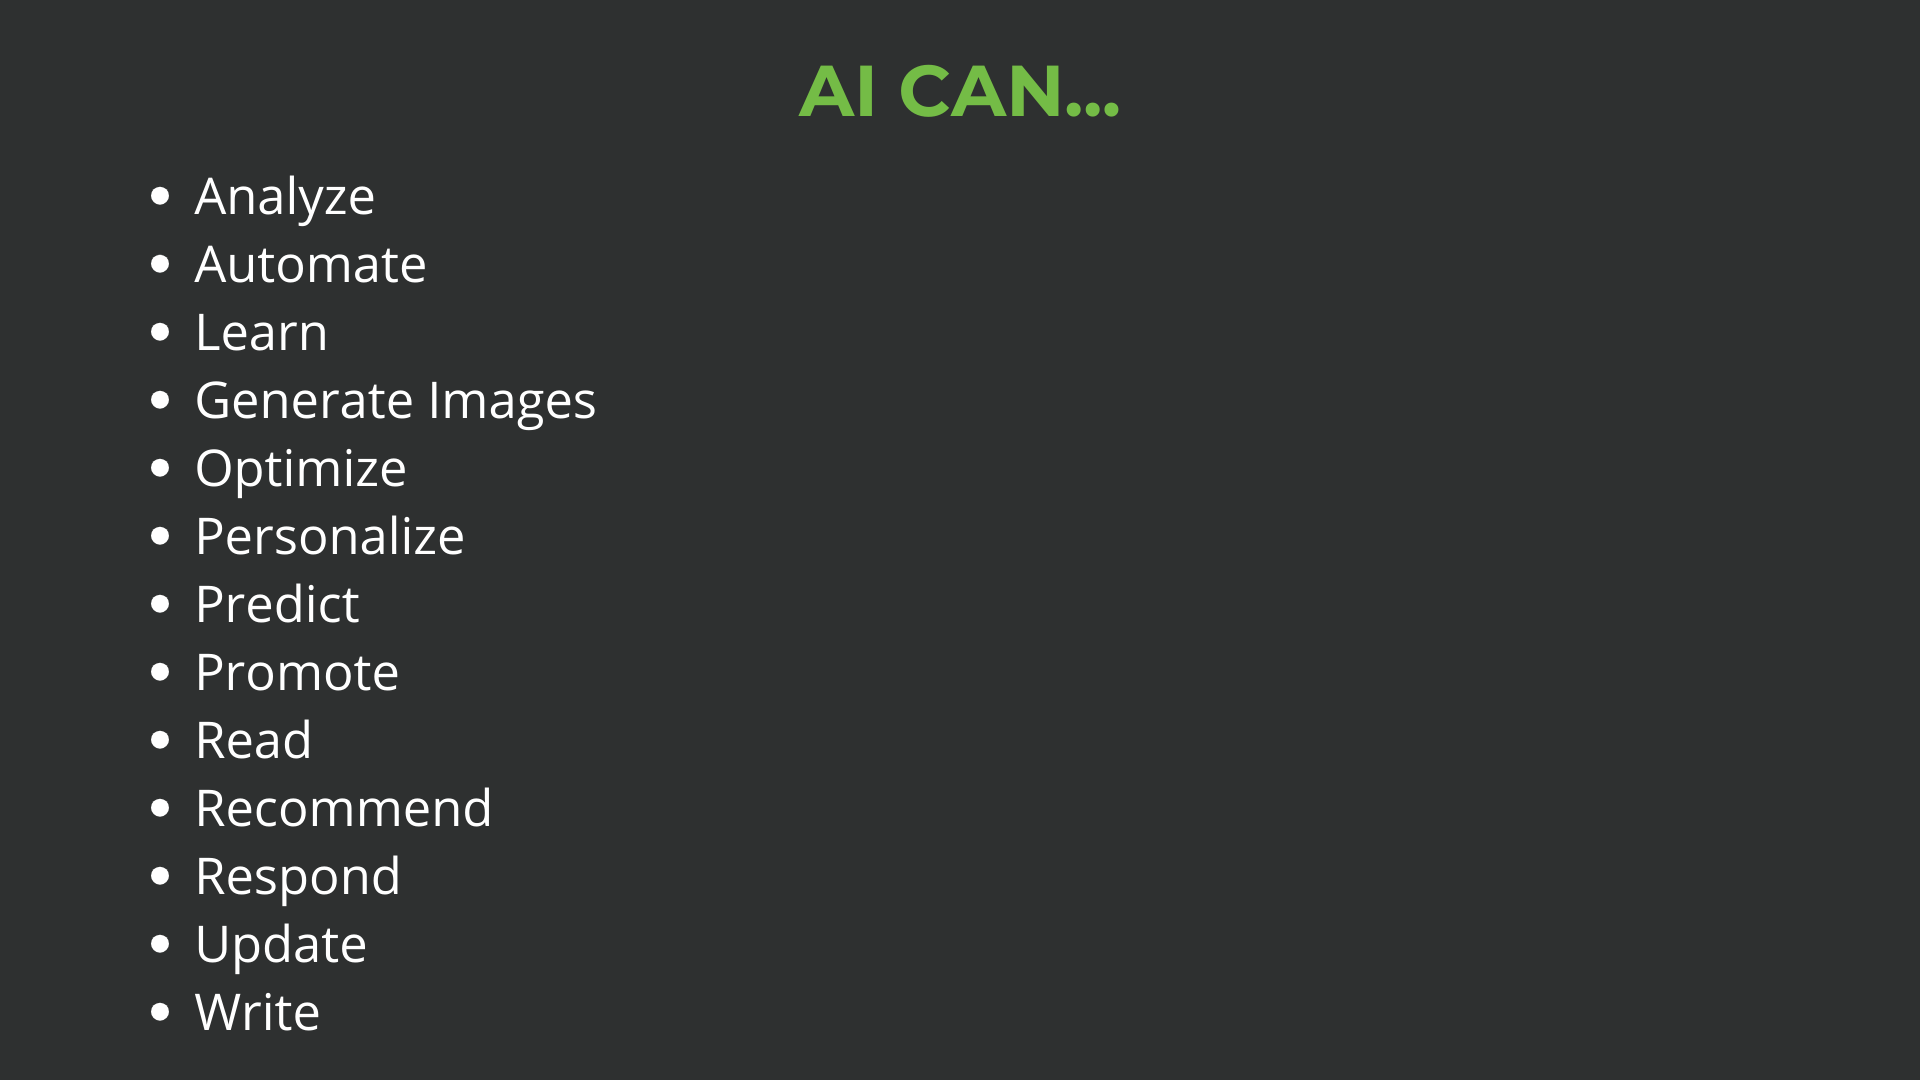 Bullet point list of white text verbs or actions that AI can do with a black background and green heading.